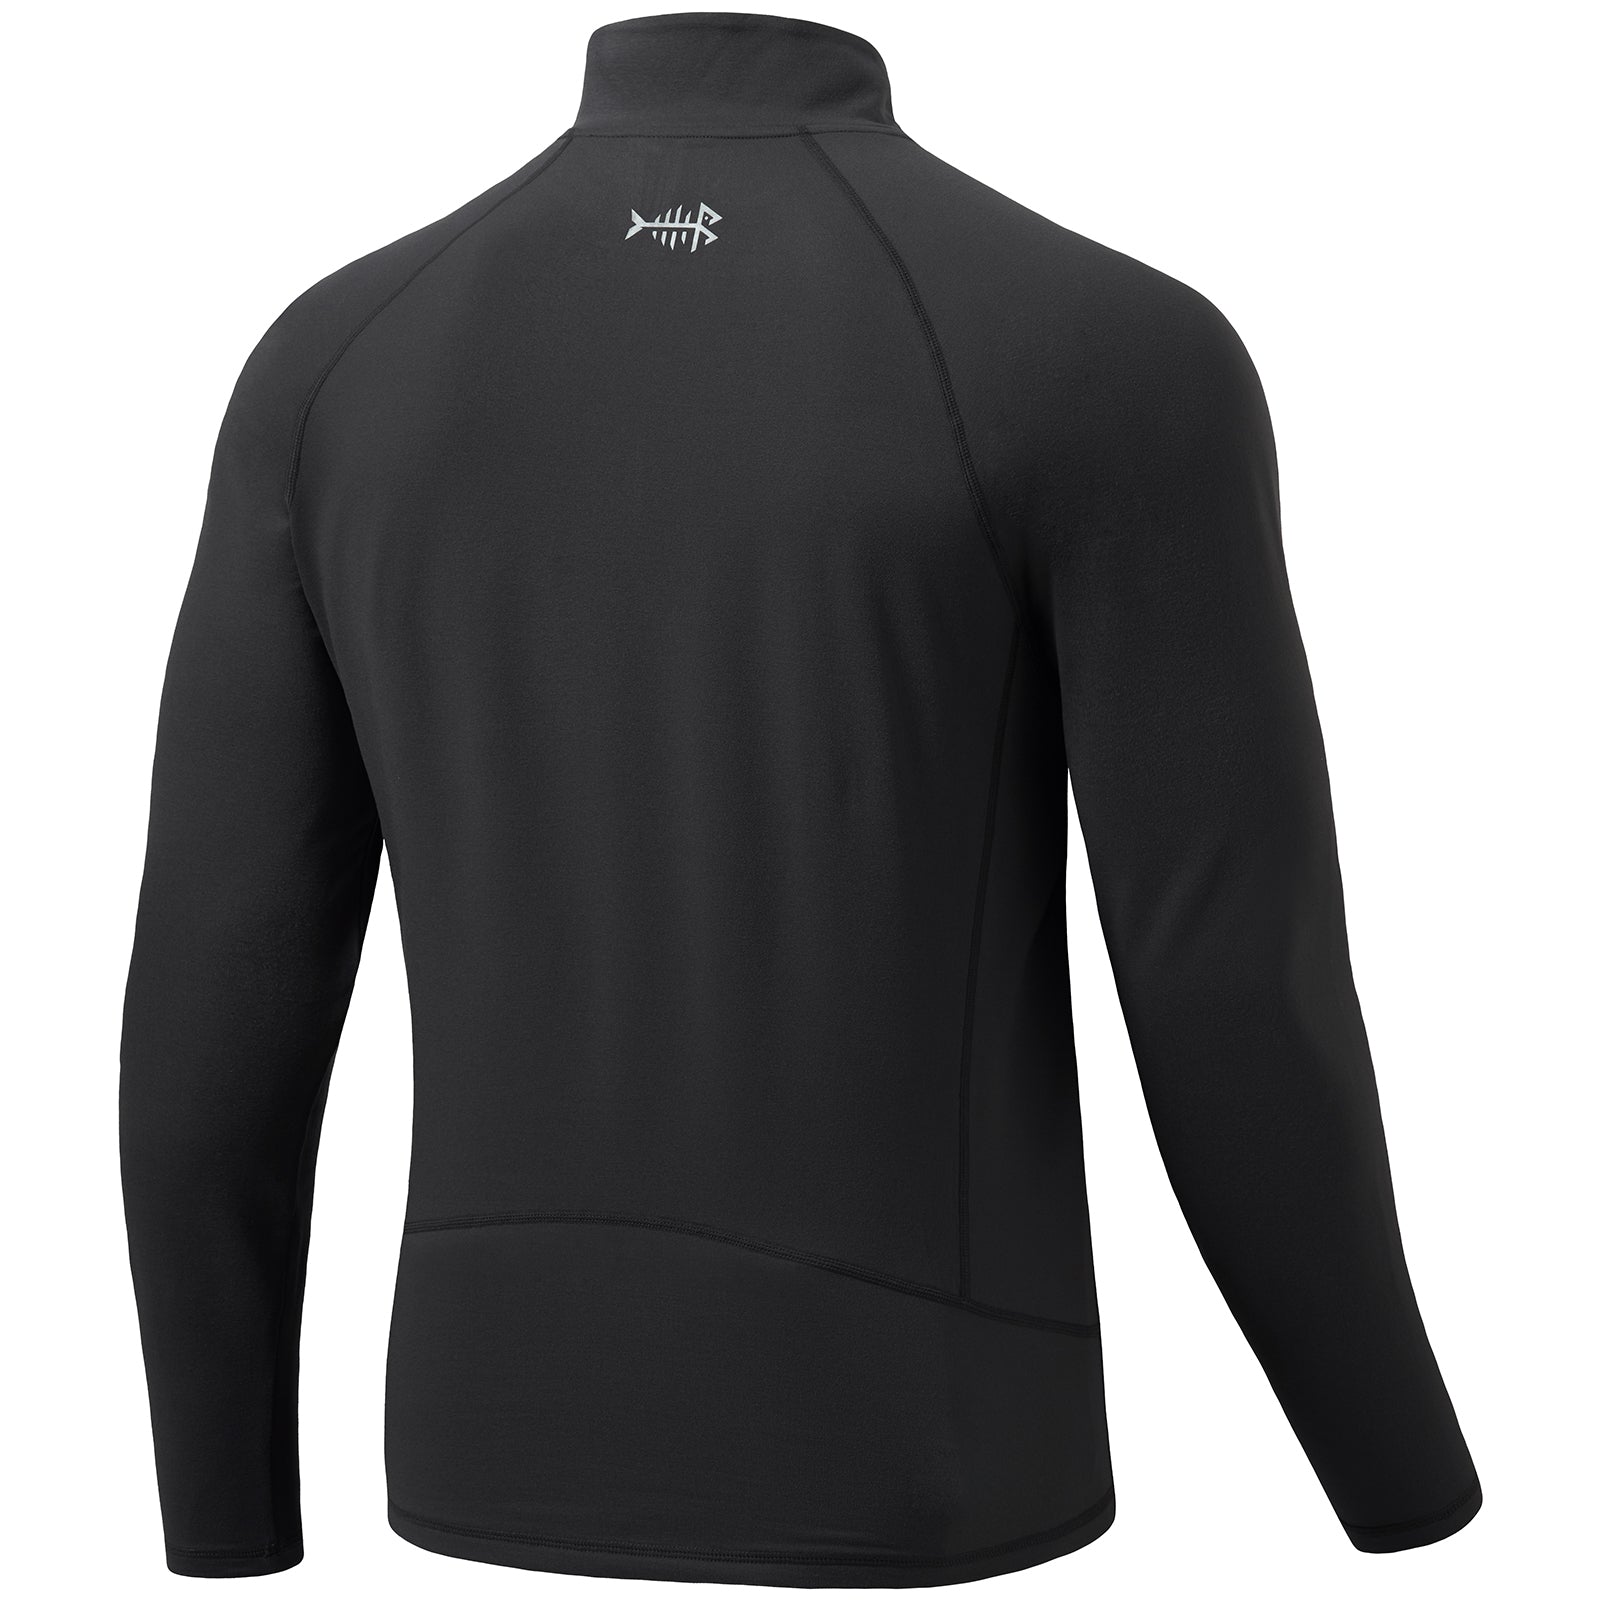 Go-Dry Cool Odor-Control Base Layer T-Shirt for Men